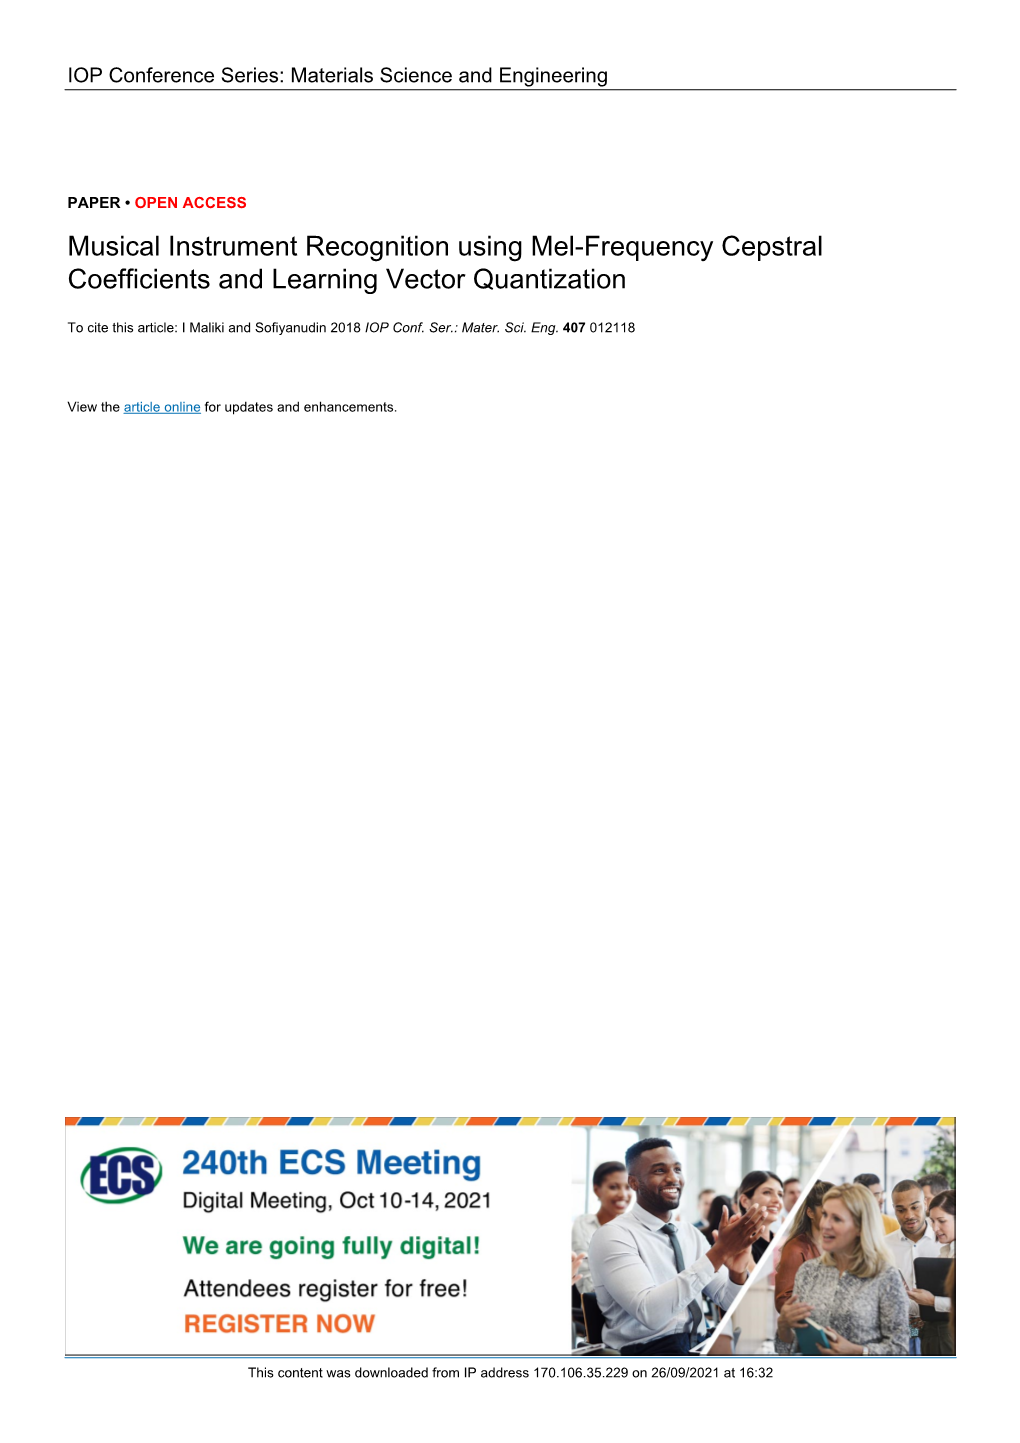 Musical Instrument Recognition Using Mel-Frequency Cepstral Coefficients and Learning Vector Quantization